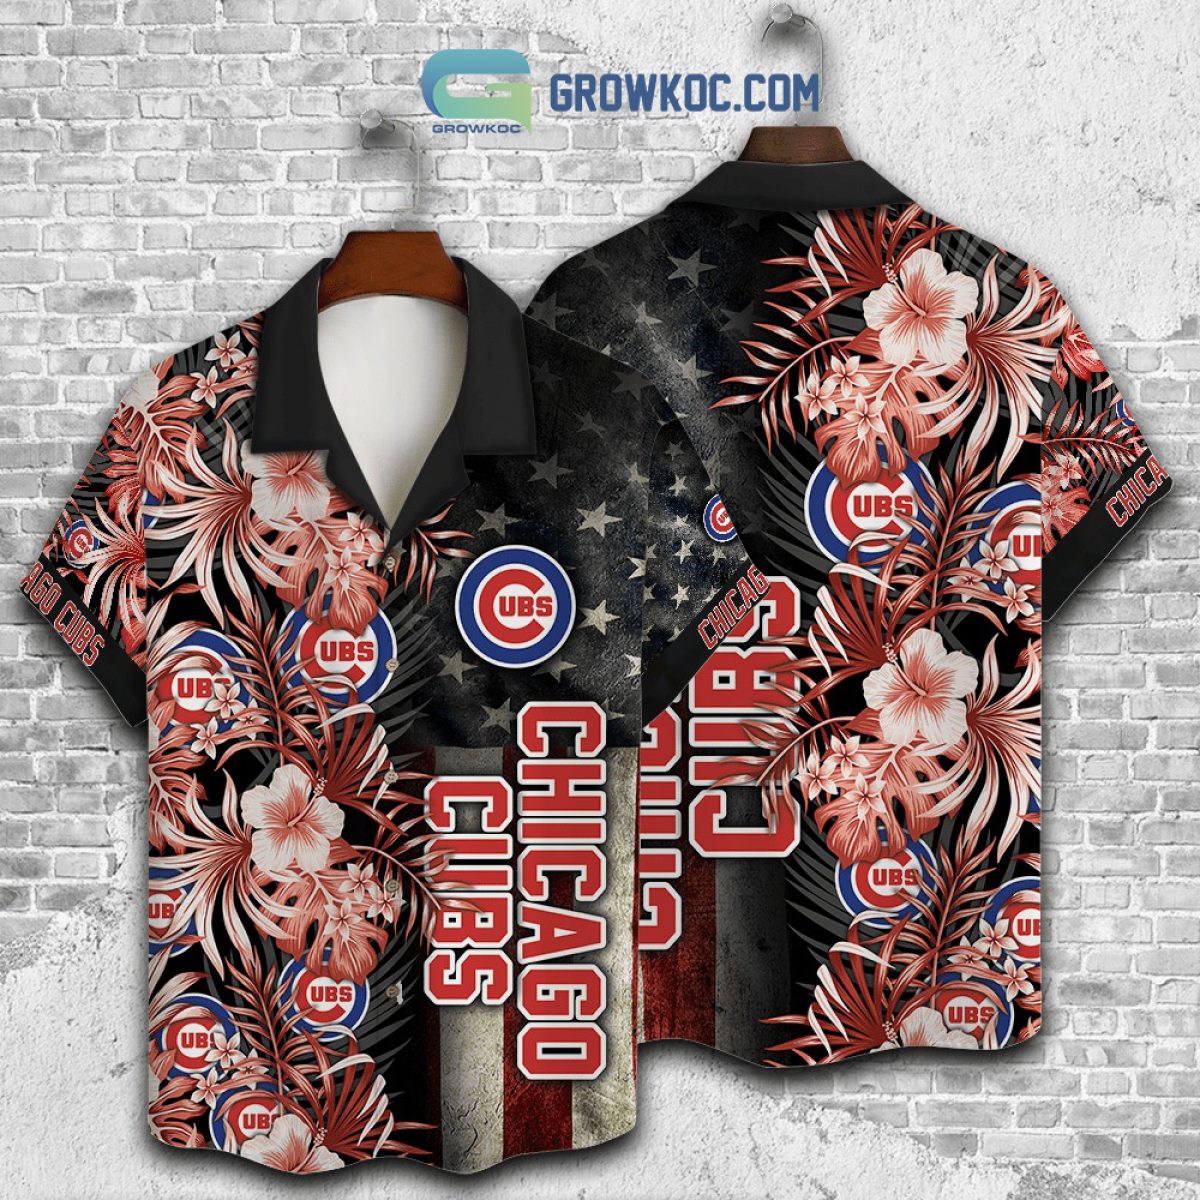 mlb chicago cubs jersey